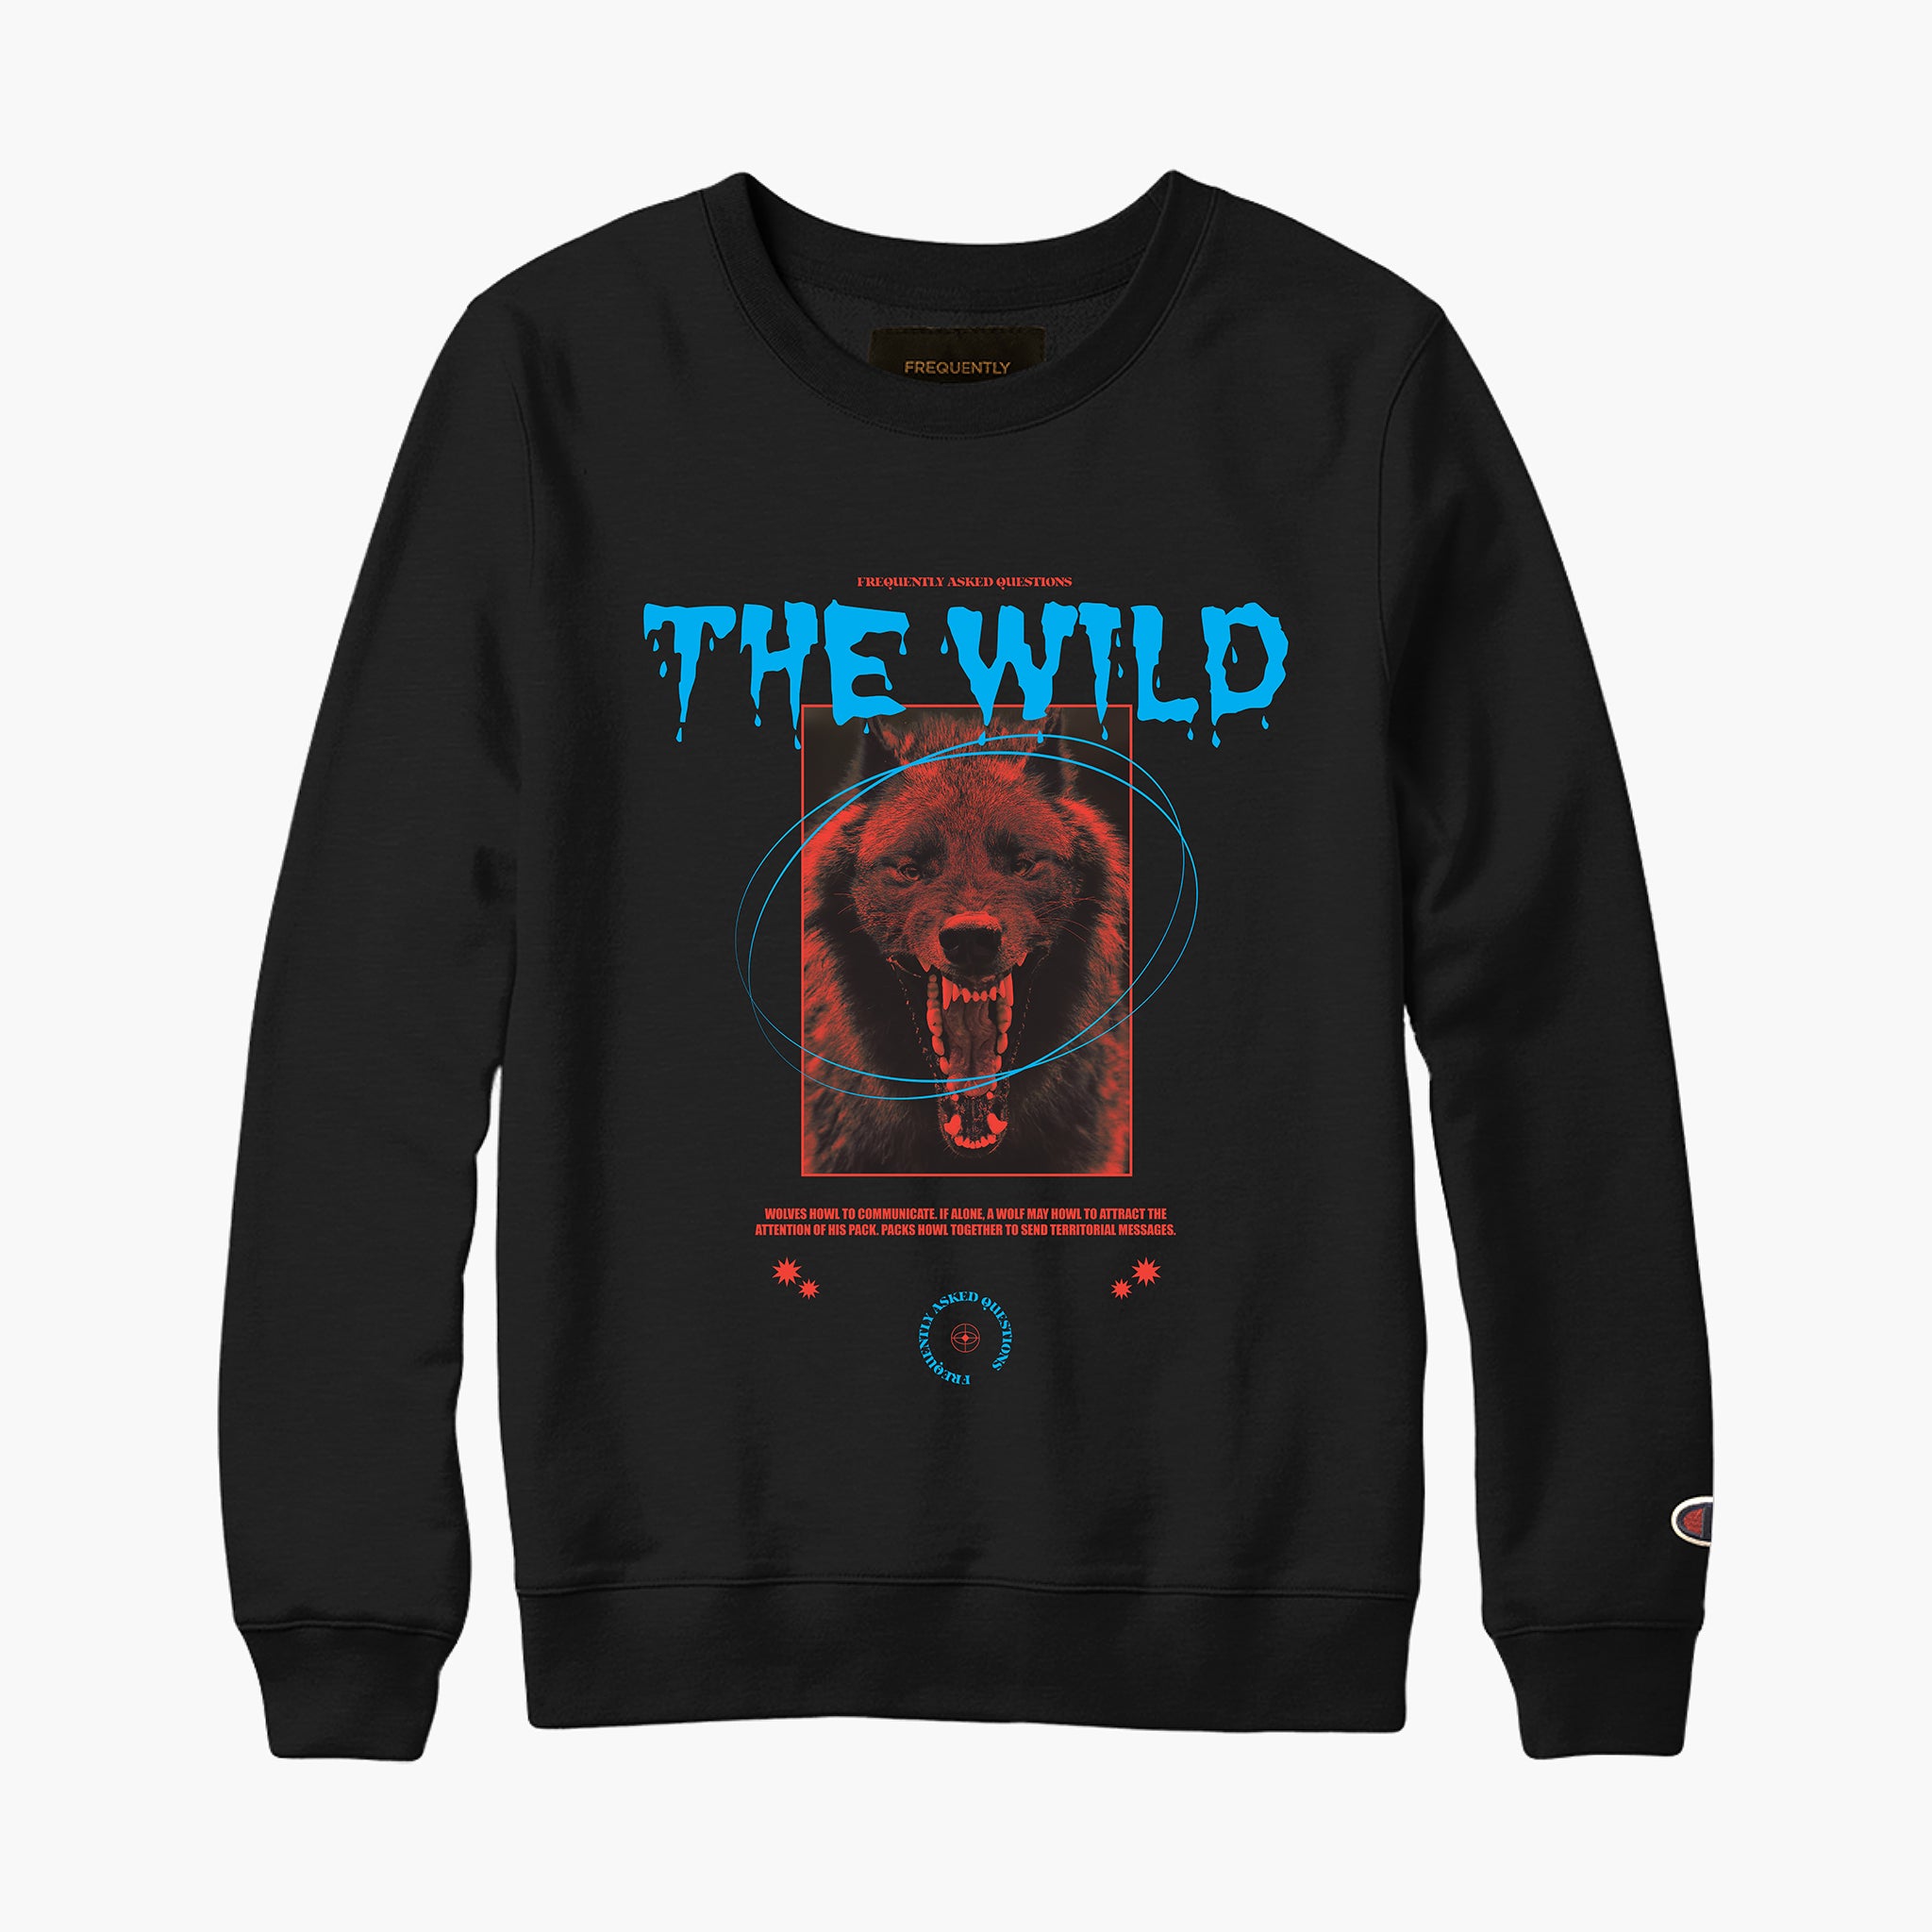 The Wild Sweatshirt - Frequently Asked Questions